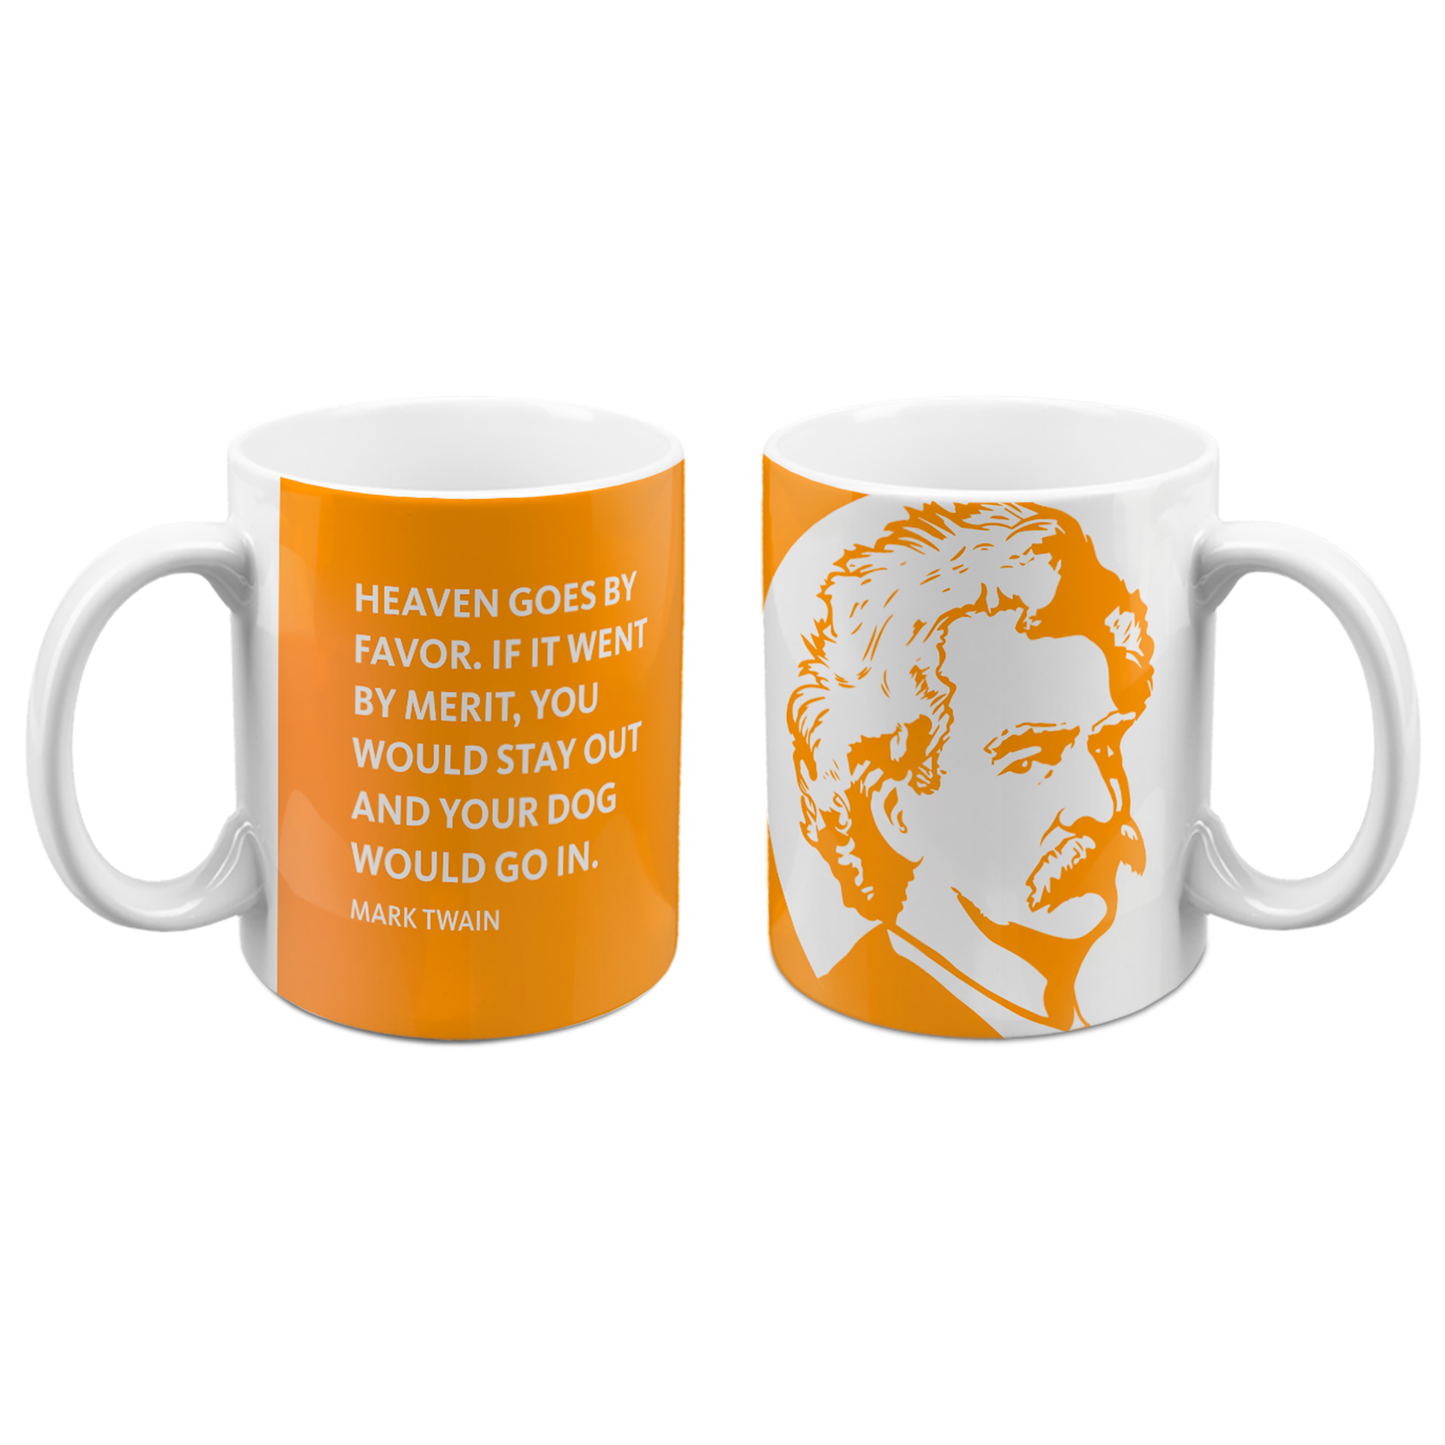 Quote Mug "Heaven Goes By Favor..."